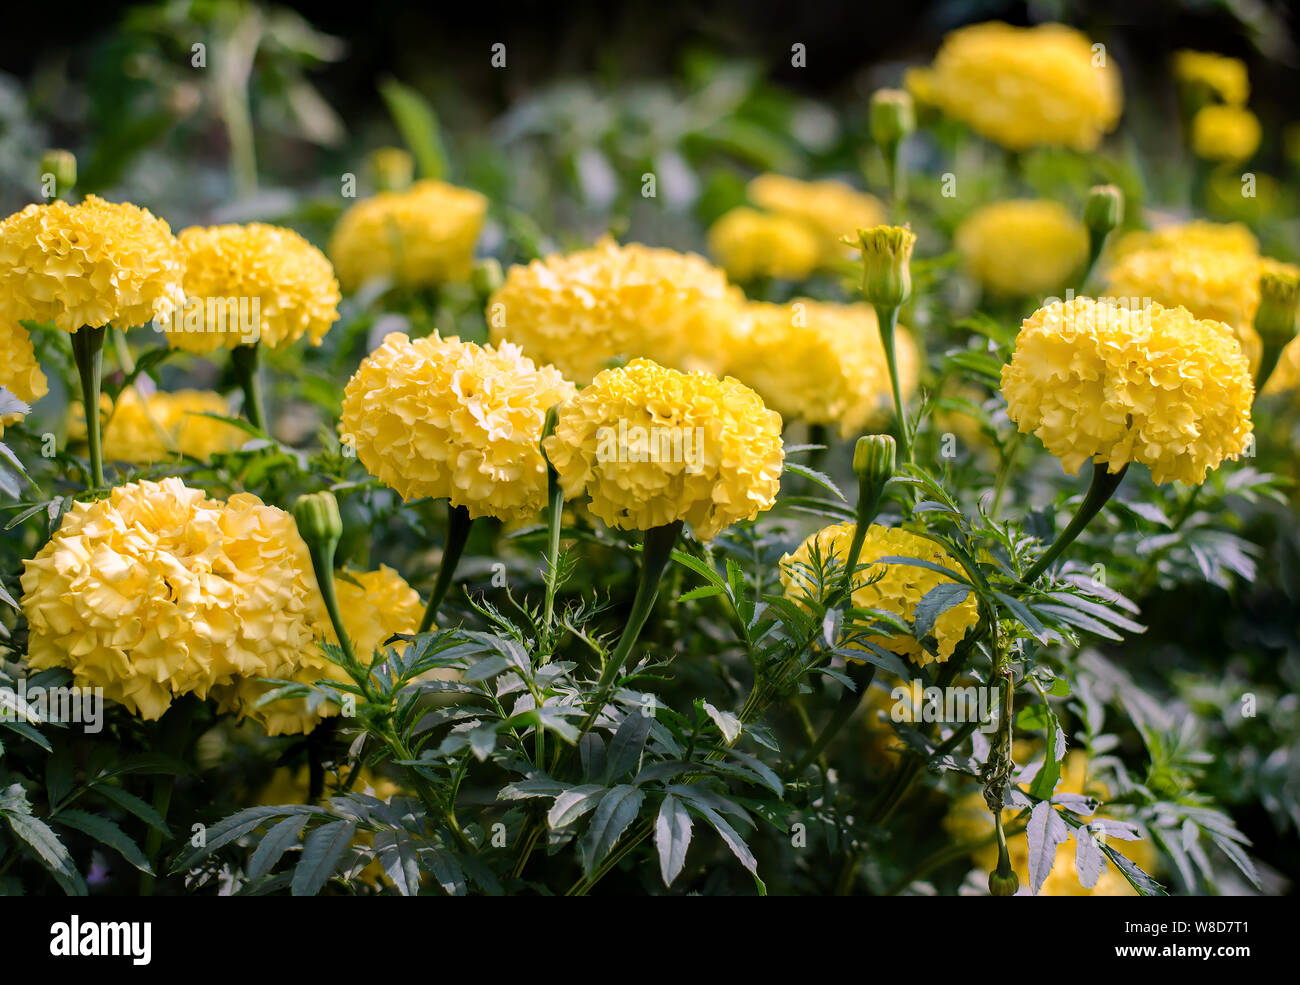 Flower bed with beautiful yellow marigolds in summer garden in sunlight Stock Photo